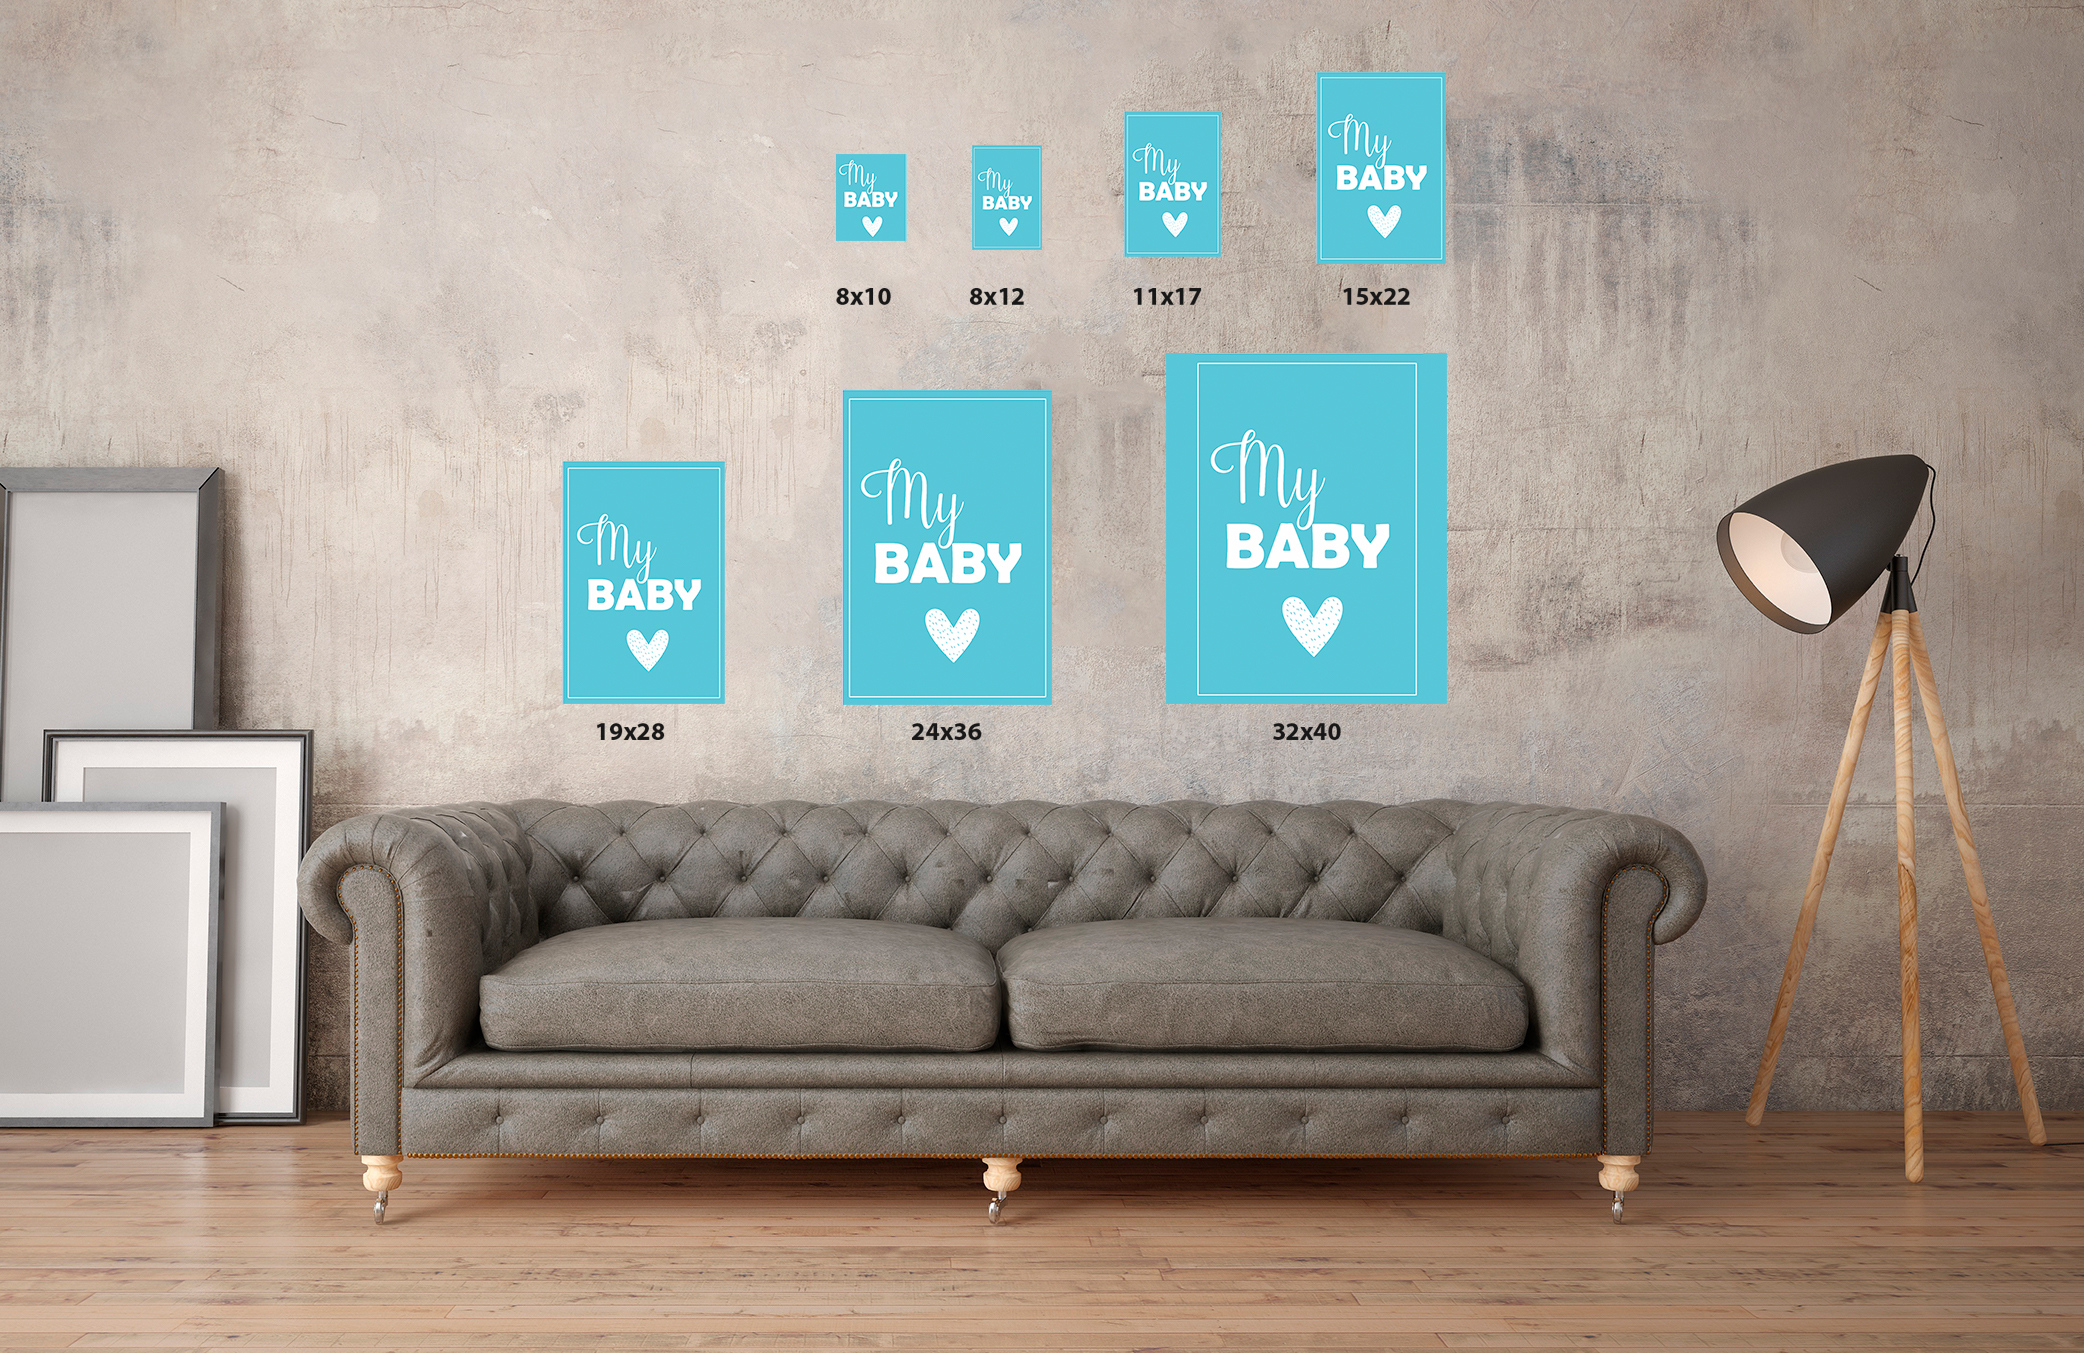 Awkward Styles My Baby Poster Wall Art Kids Room Wall Decor Blue Poster Baby Room Decor Gifts for Kids Baby Boys Room Printed Art Decals Newborn Baby Room Poster Wall Decor Mother Quotes Poster Art - image 3 of 3